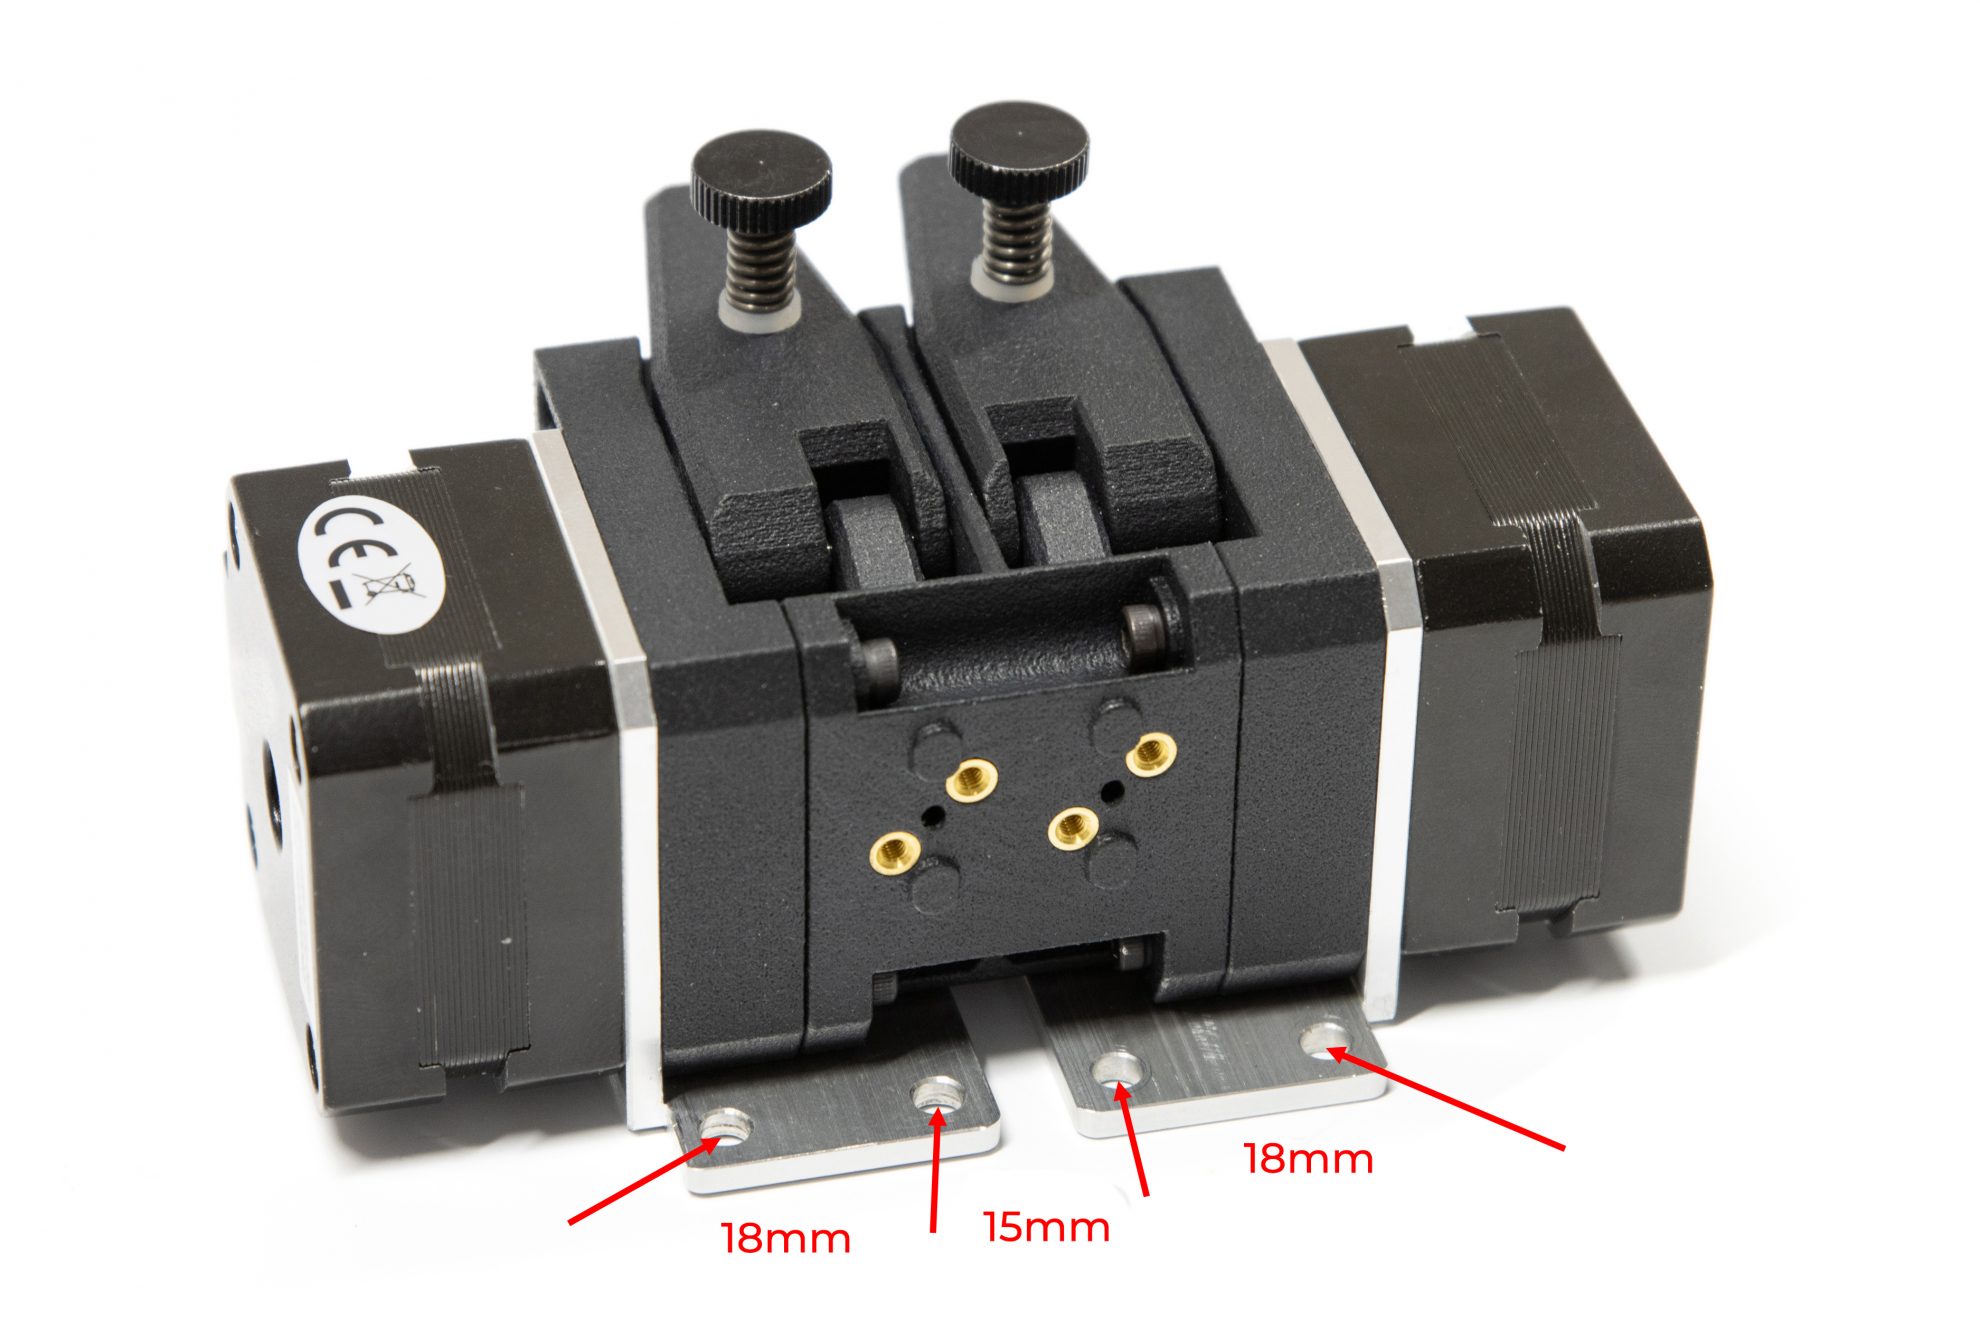 BMG-X2-M extruder with BMG Alu Mount Plates